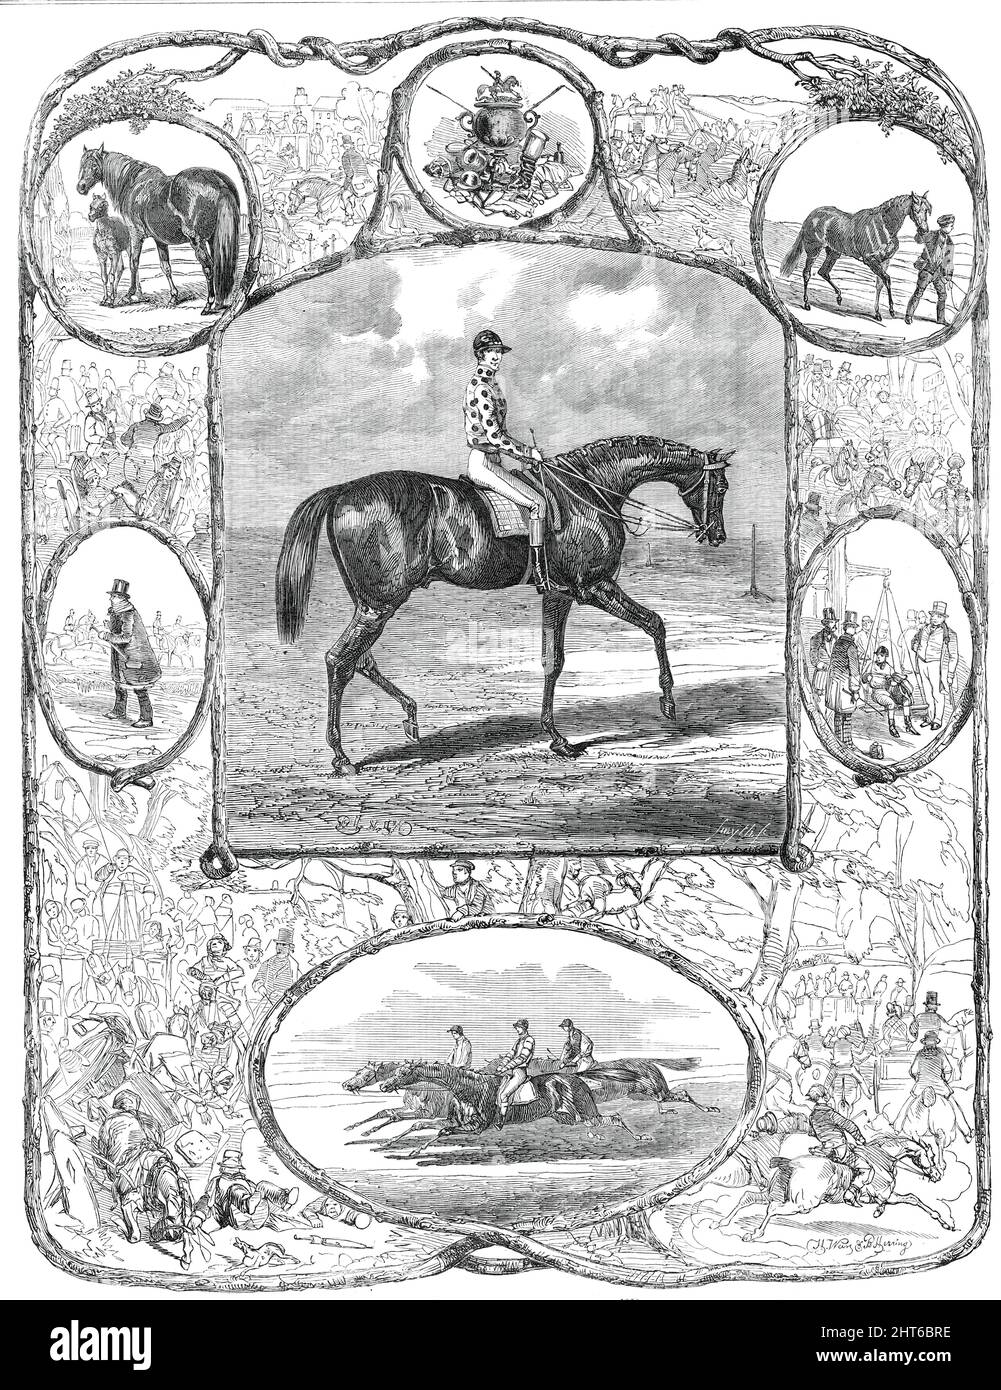 Voltigeur, the Winner of the Derby Stakes, 1850, (1850). Epsom horse races in Surrey. 'Voltigeur, nominally at 25 to 1, wins by a length, with Pitsford next him!'. Voltigeur was owned by Lord Zetland and ridden by Job Marson. From &quot;Illustrated London News&quot;, 1850. Stock Photo